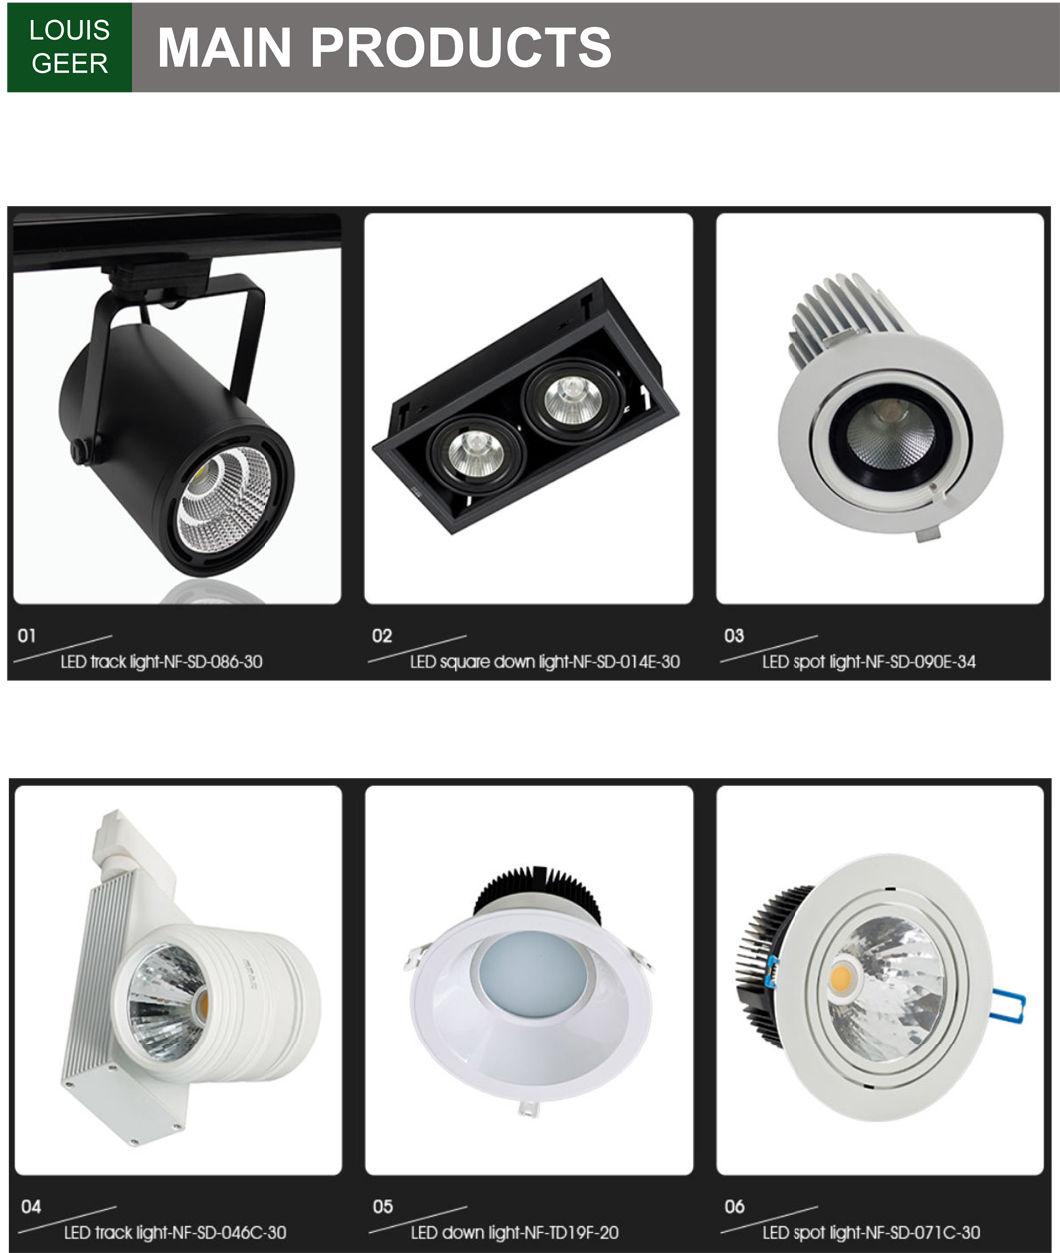 Top Sale Modern Office Recessed Panel Emergency LED Grille Light